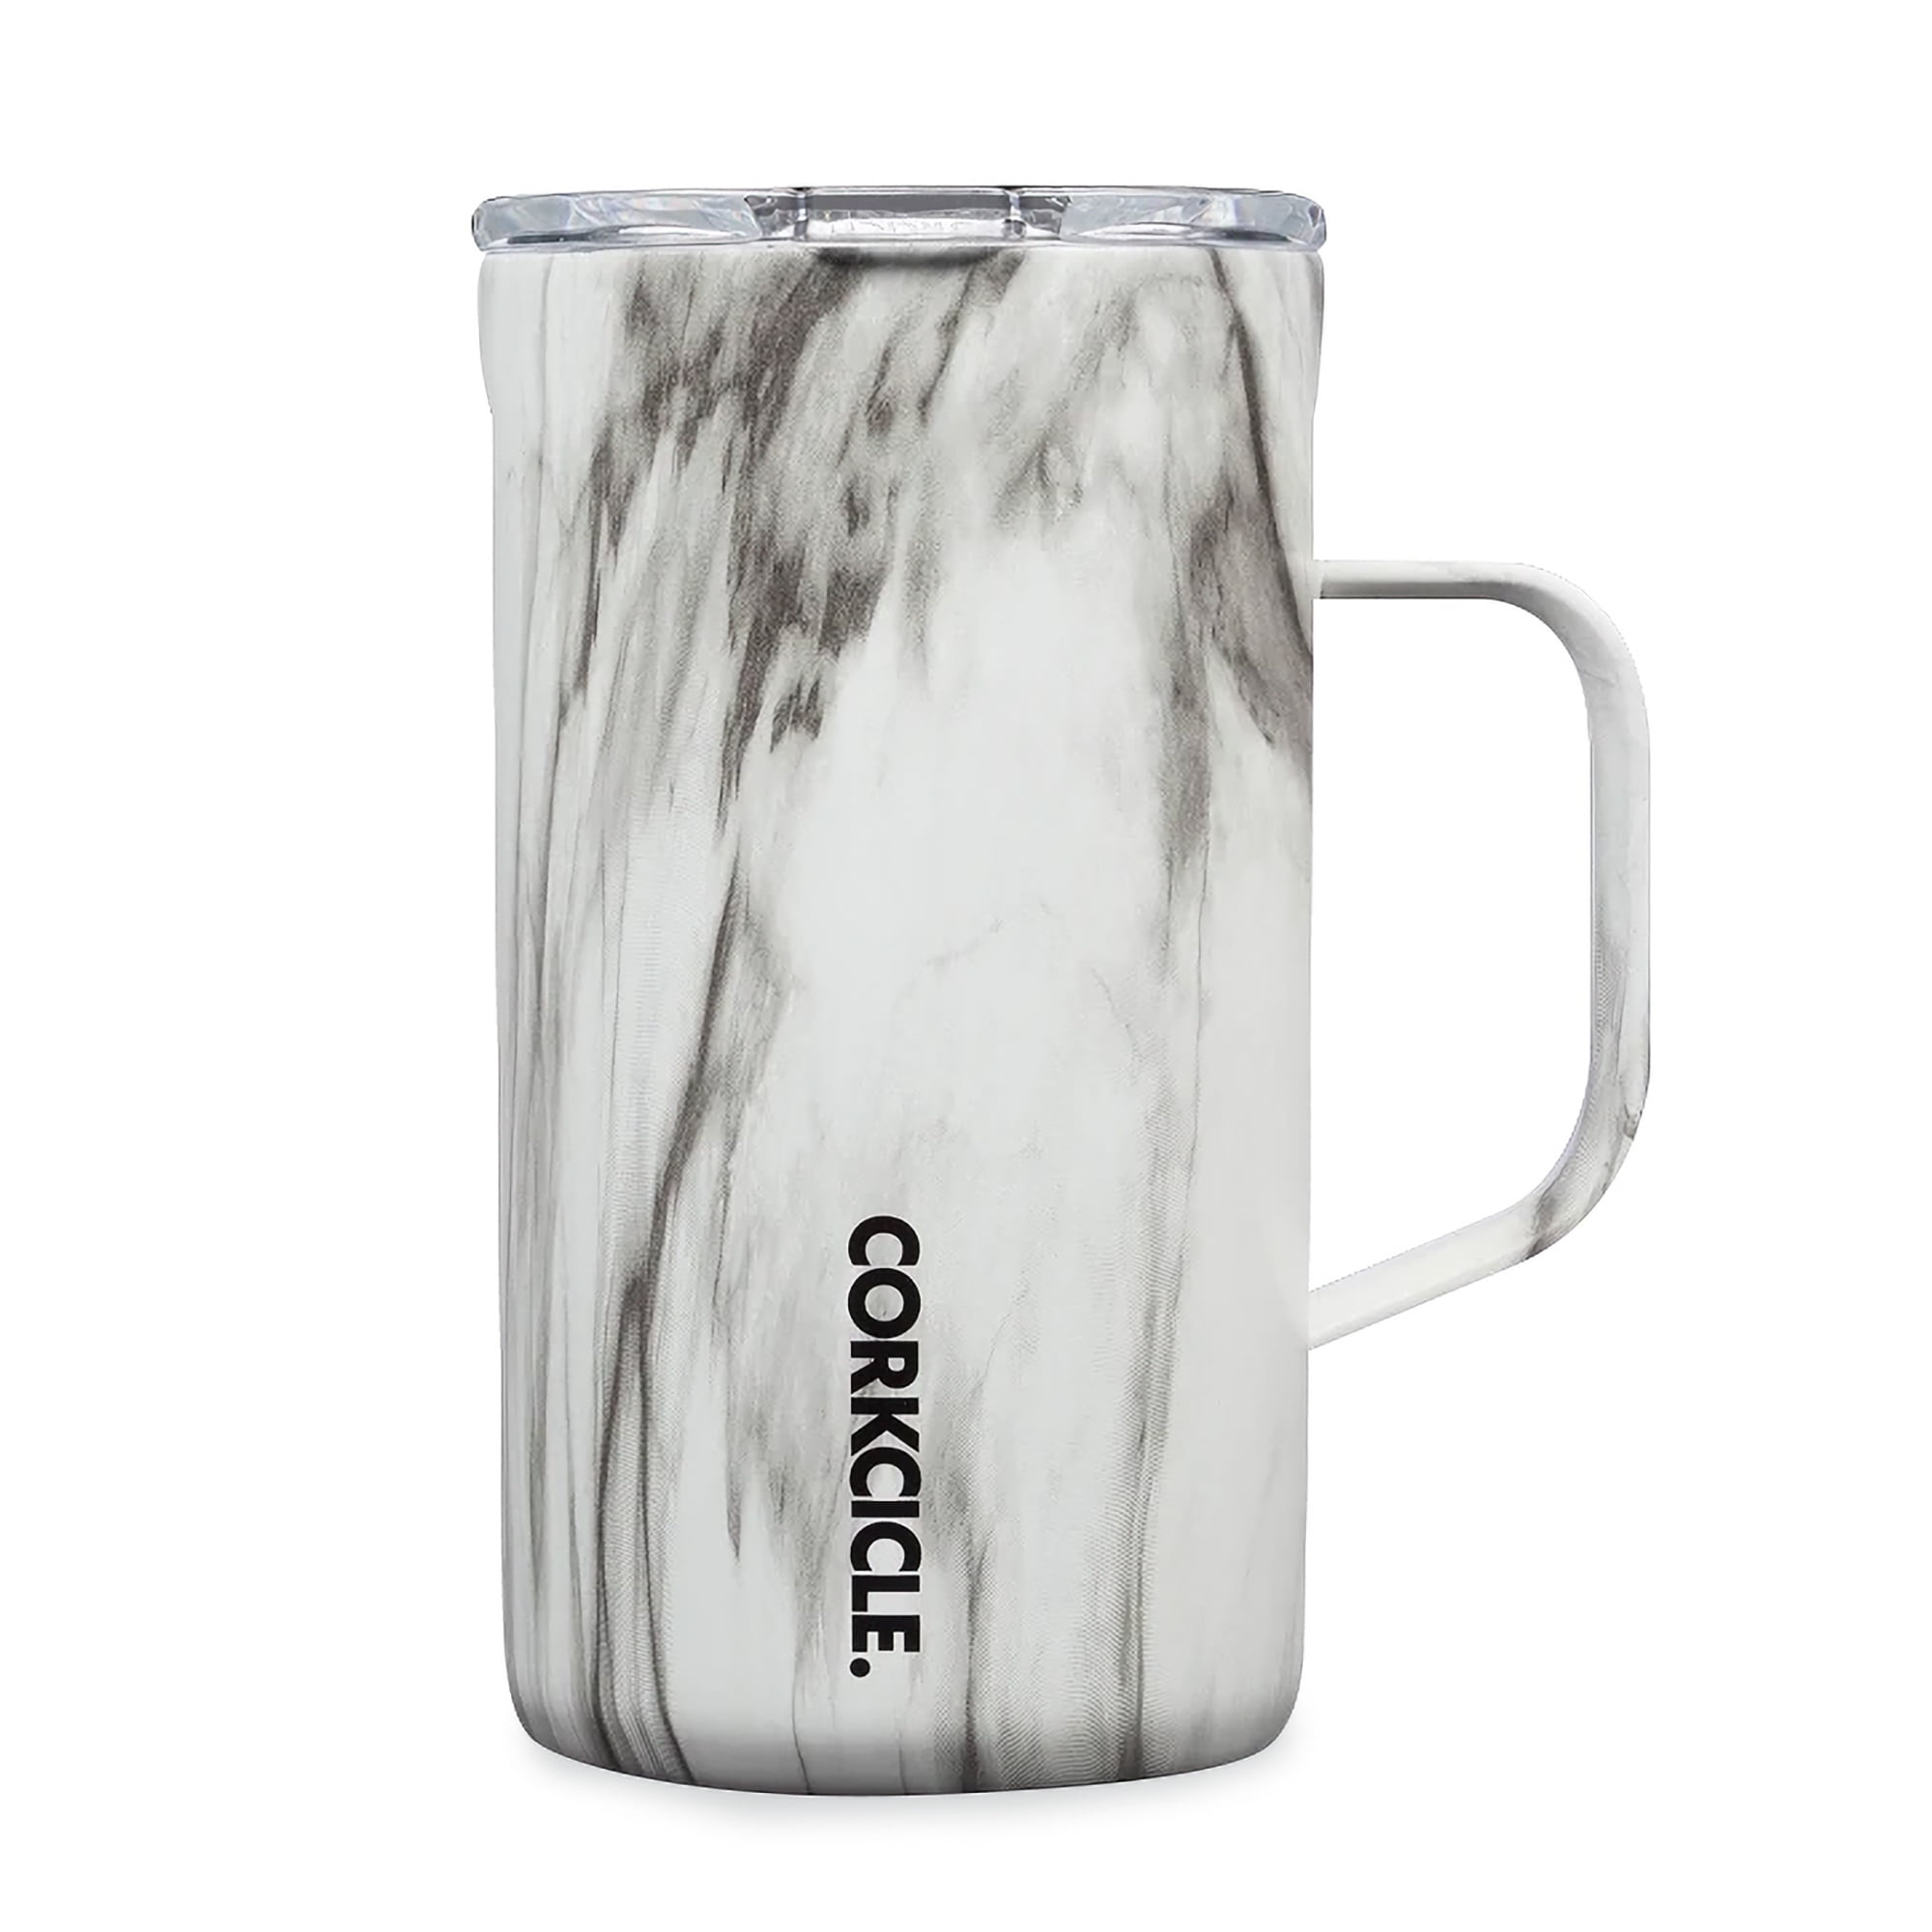 Corkcicle Triple Insulated Coffee Mug with Lid, Stainless Steel Camping  Tumbler with Handle, Hot for…See more Corkcicle Triple Insulated Coffee Mug